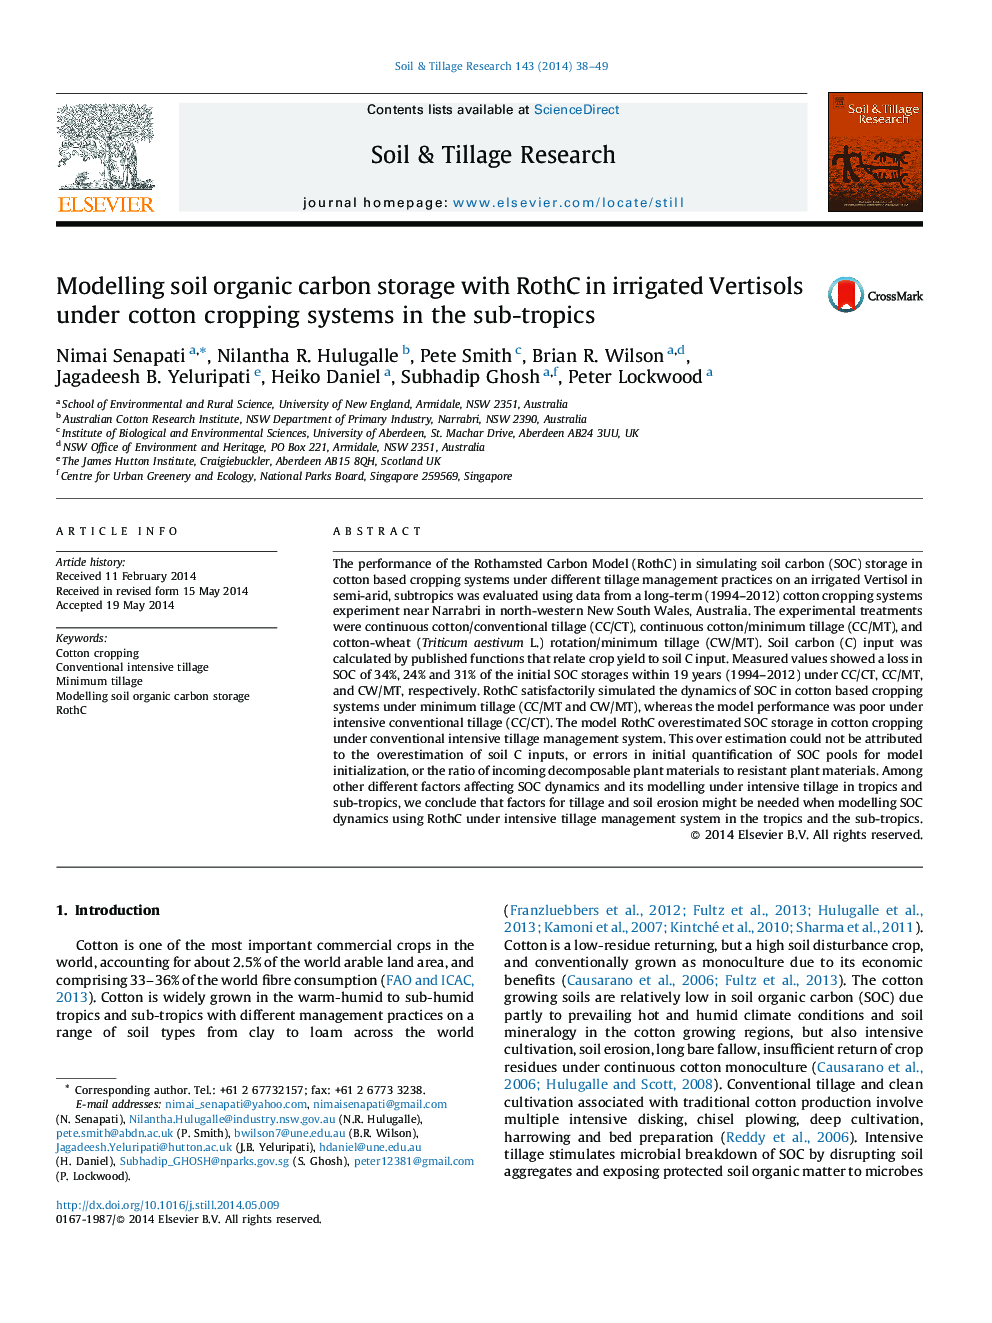 Modelling soil organic carbon storage with RothC in irrigated Vertisols under cotton cropping systems in the sub-tropics